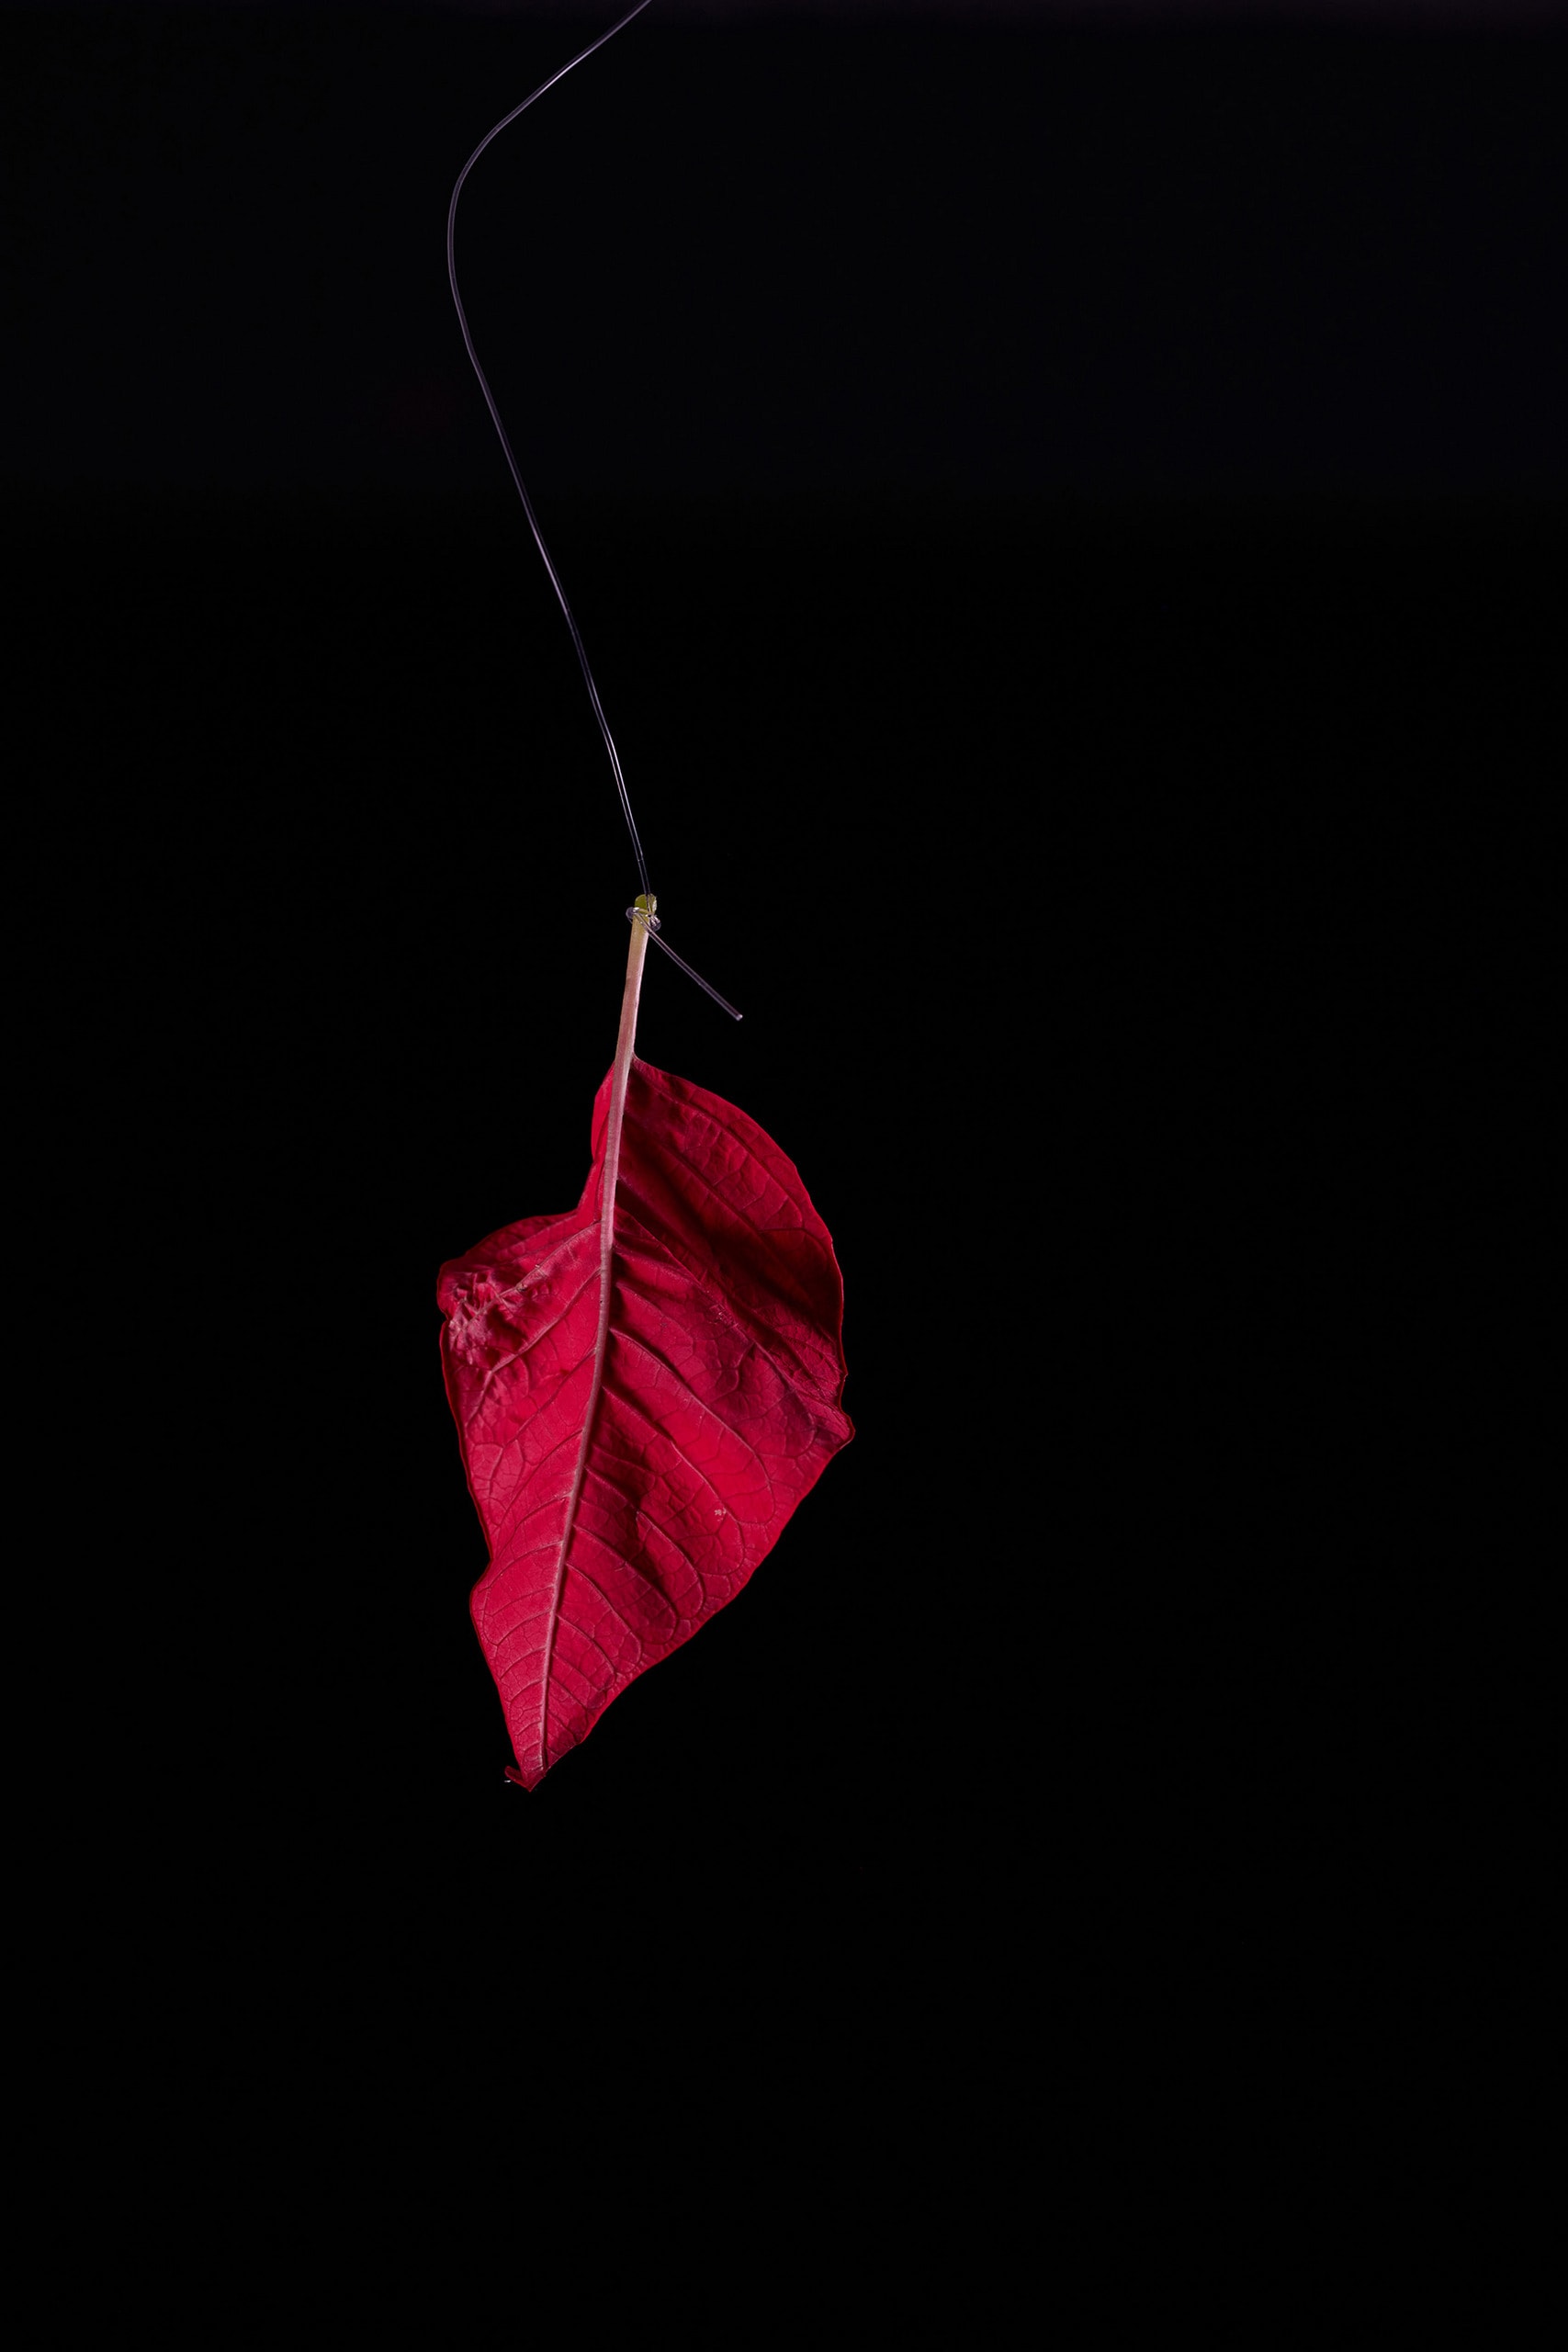 Suspended flower petal with a bug hangs in fine balance and emerges from darkness.